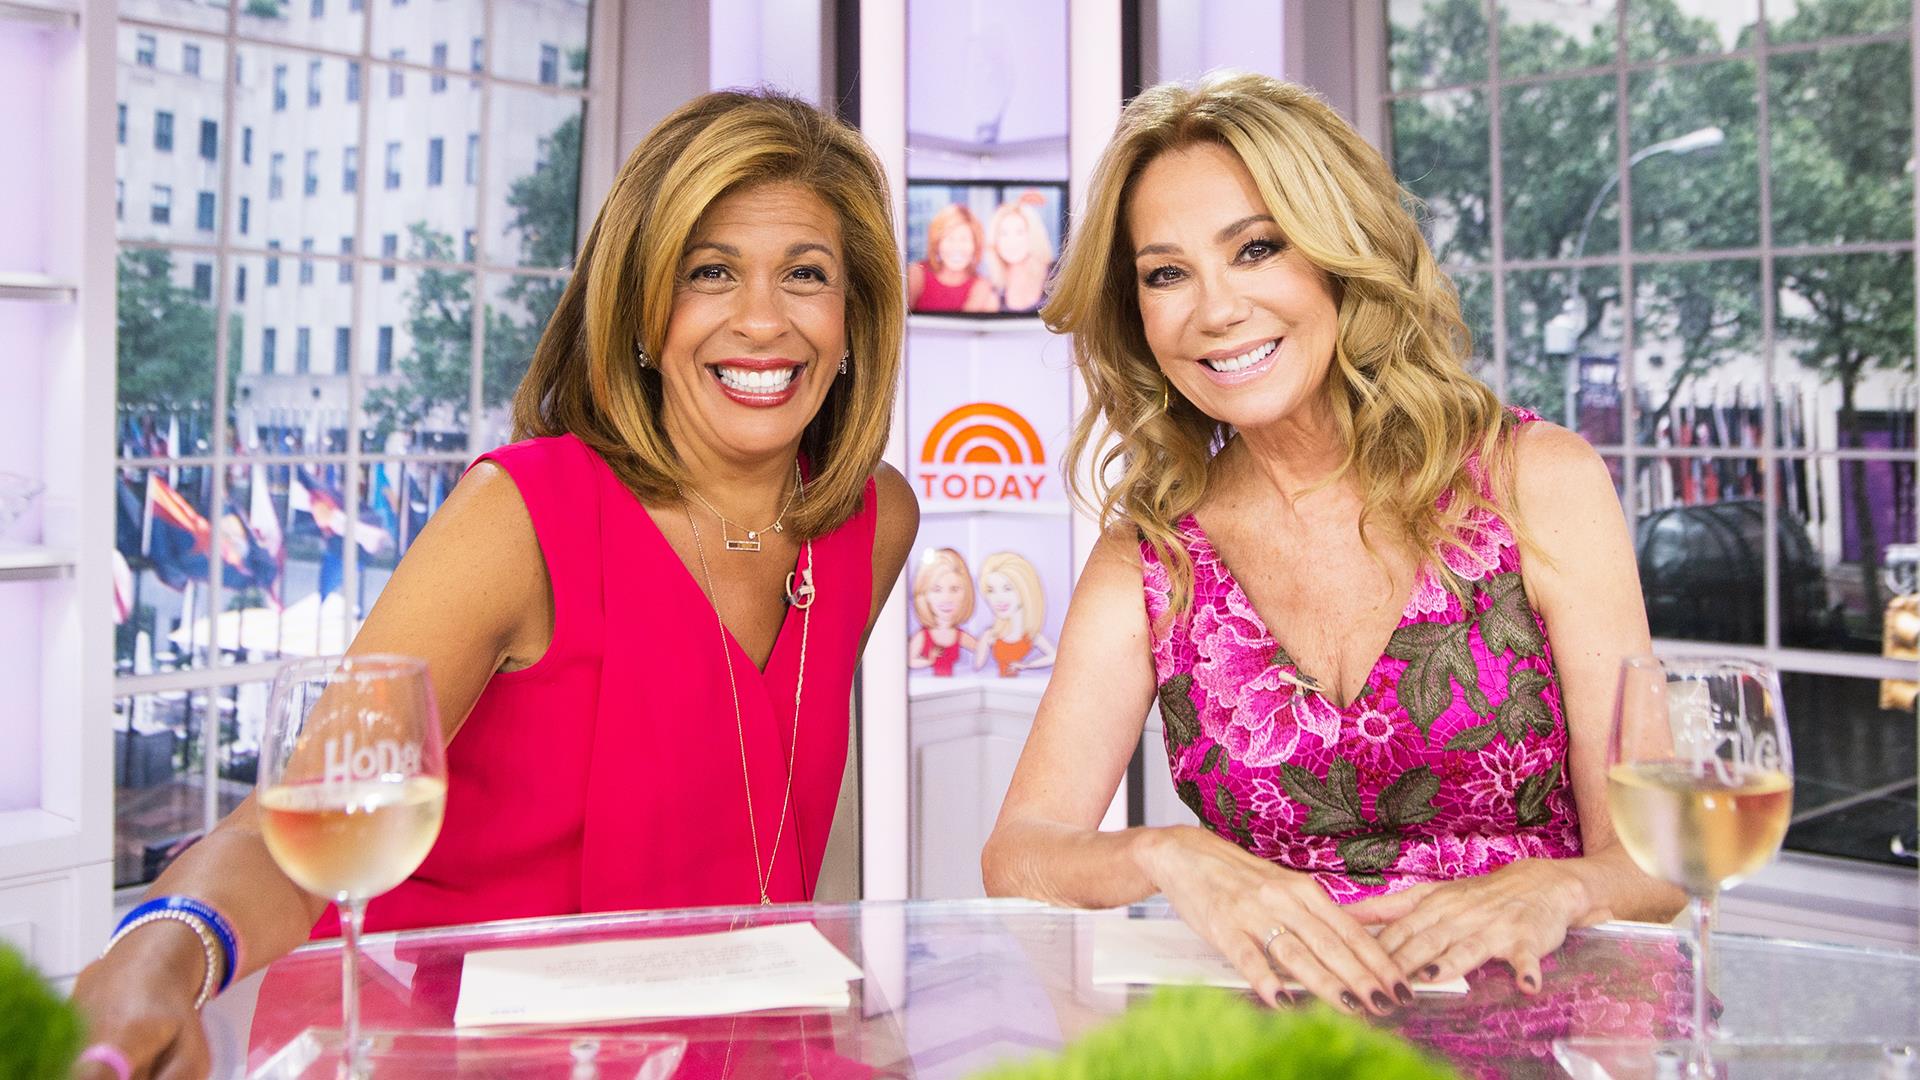 As 2017 draws to a close, Kathie Lee Gifford and Hoda Kotb take a look back...